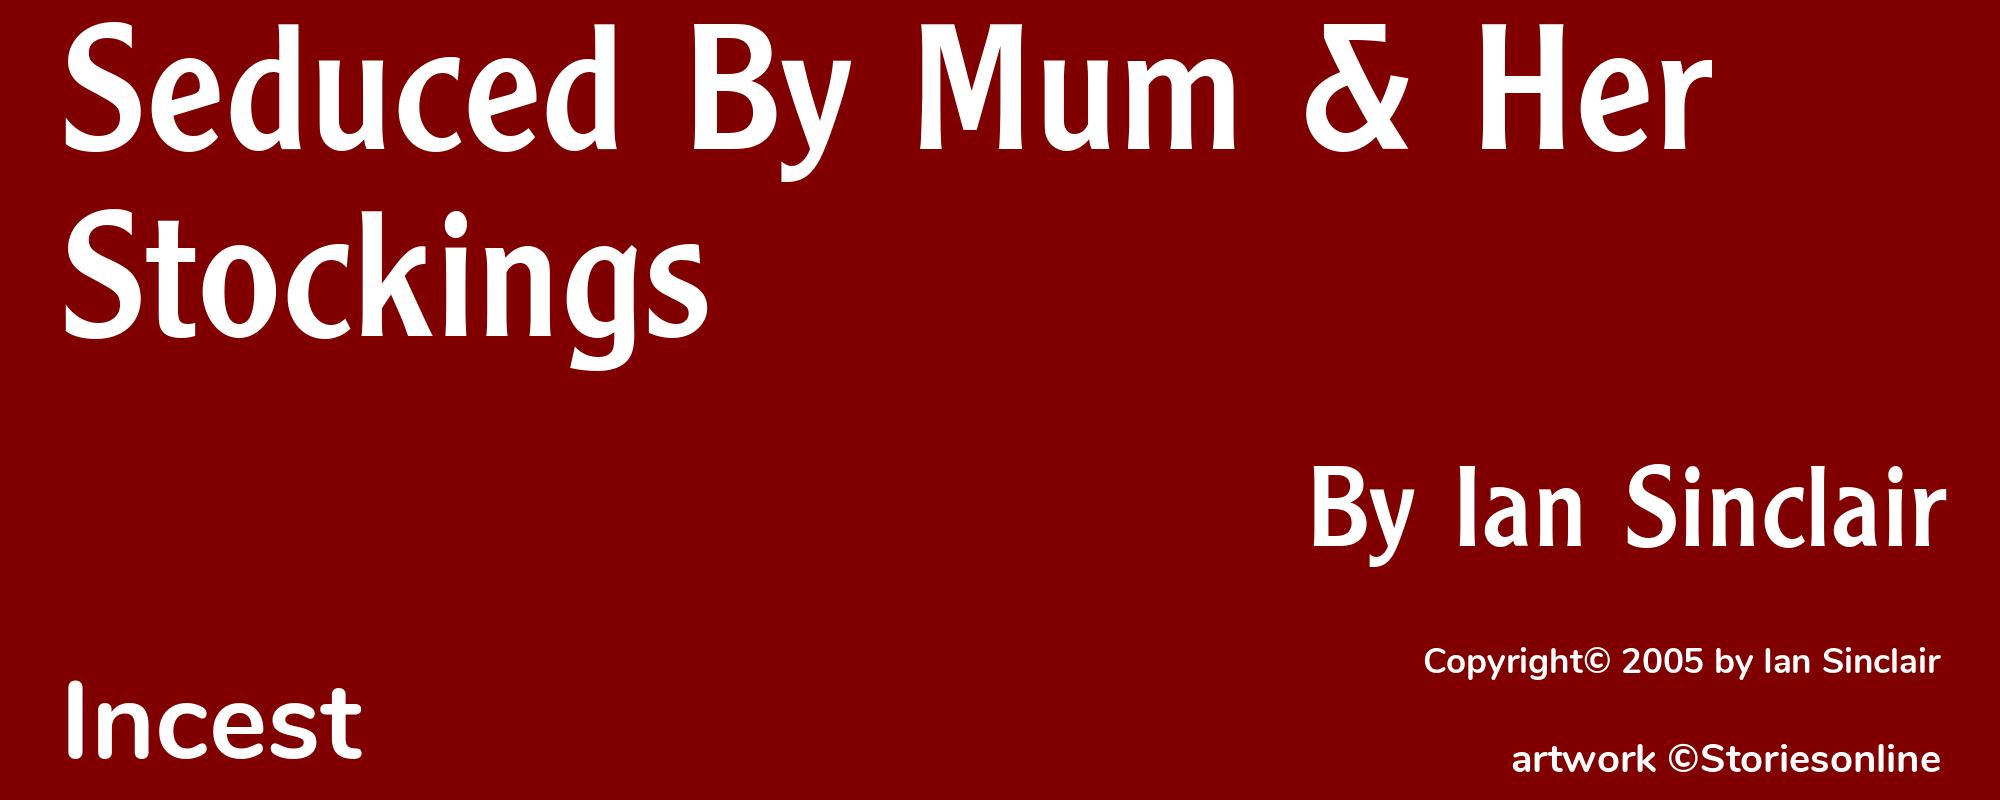 Seduced By Mum & Her Stockings - Cover